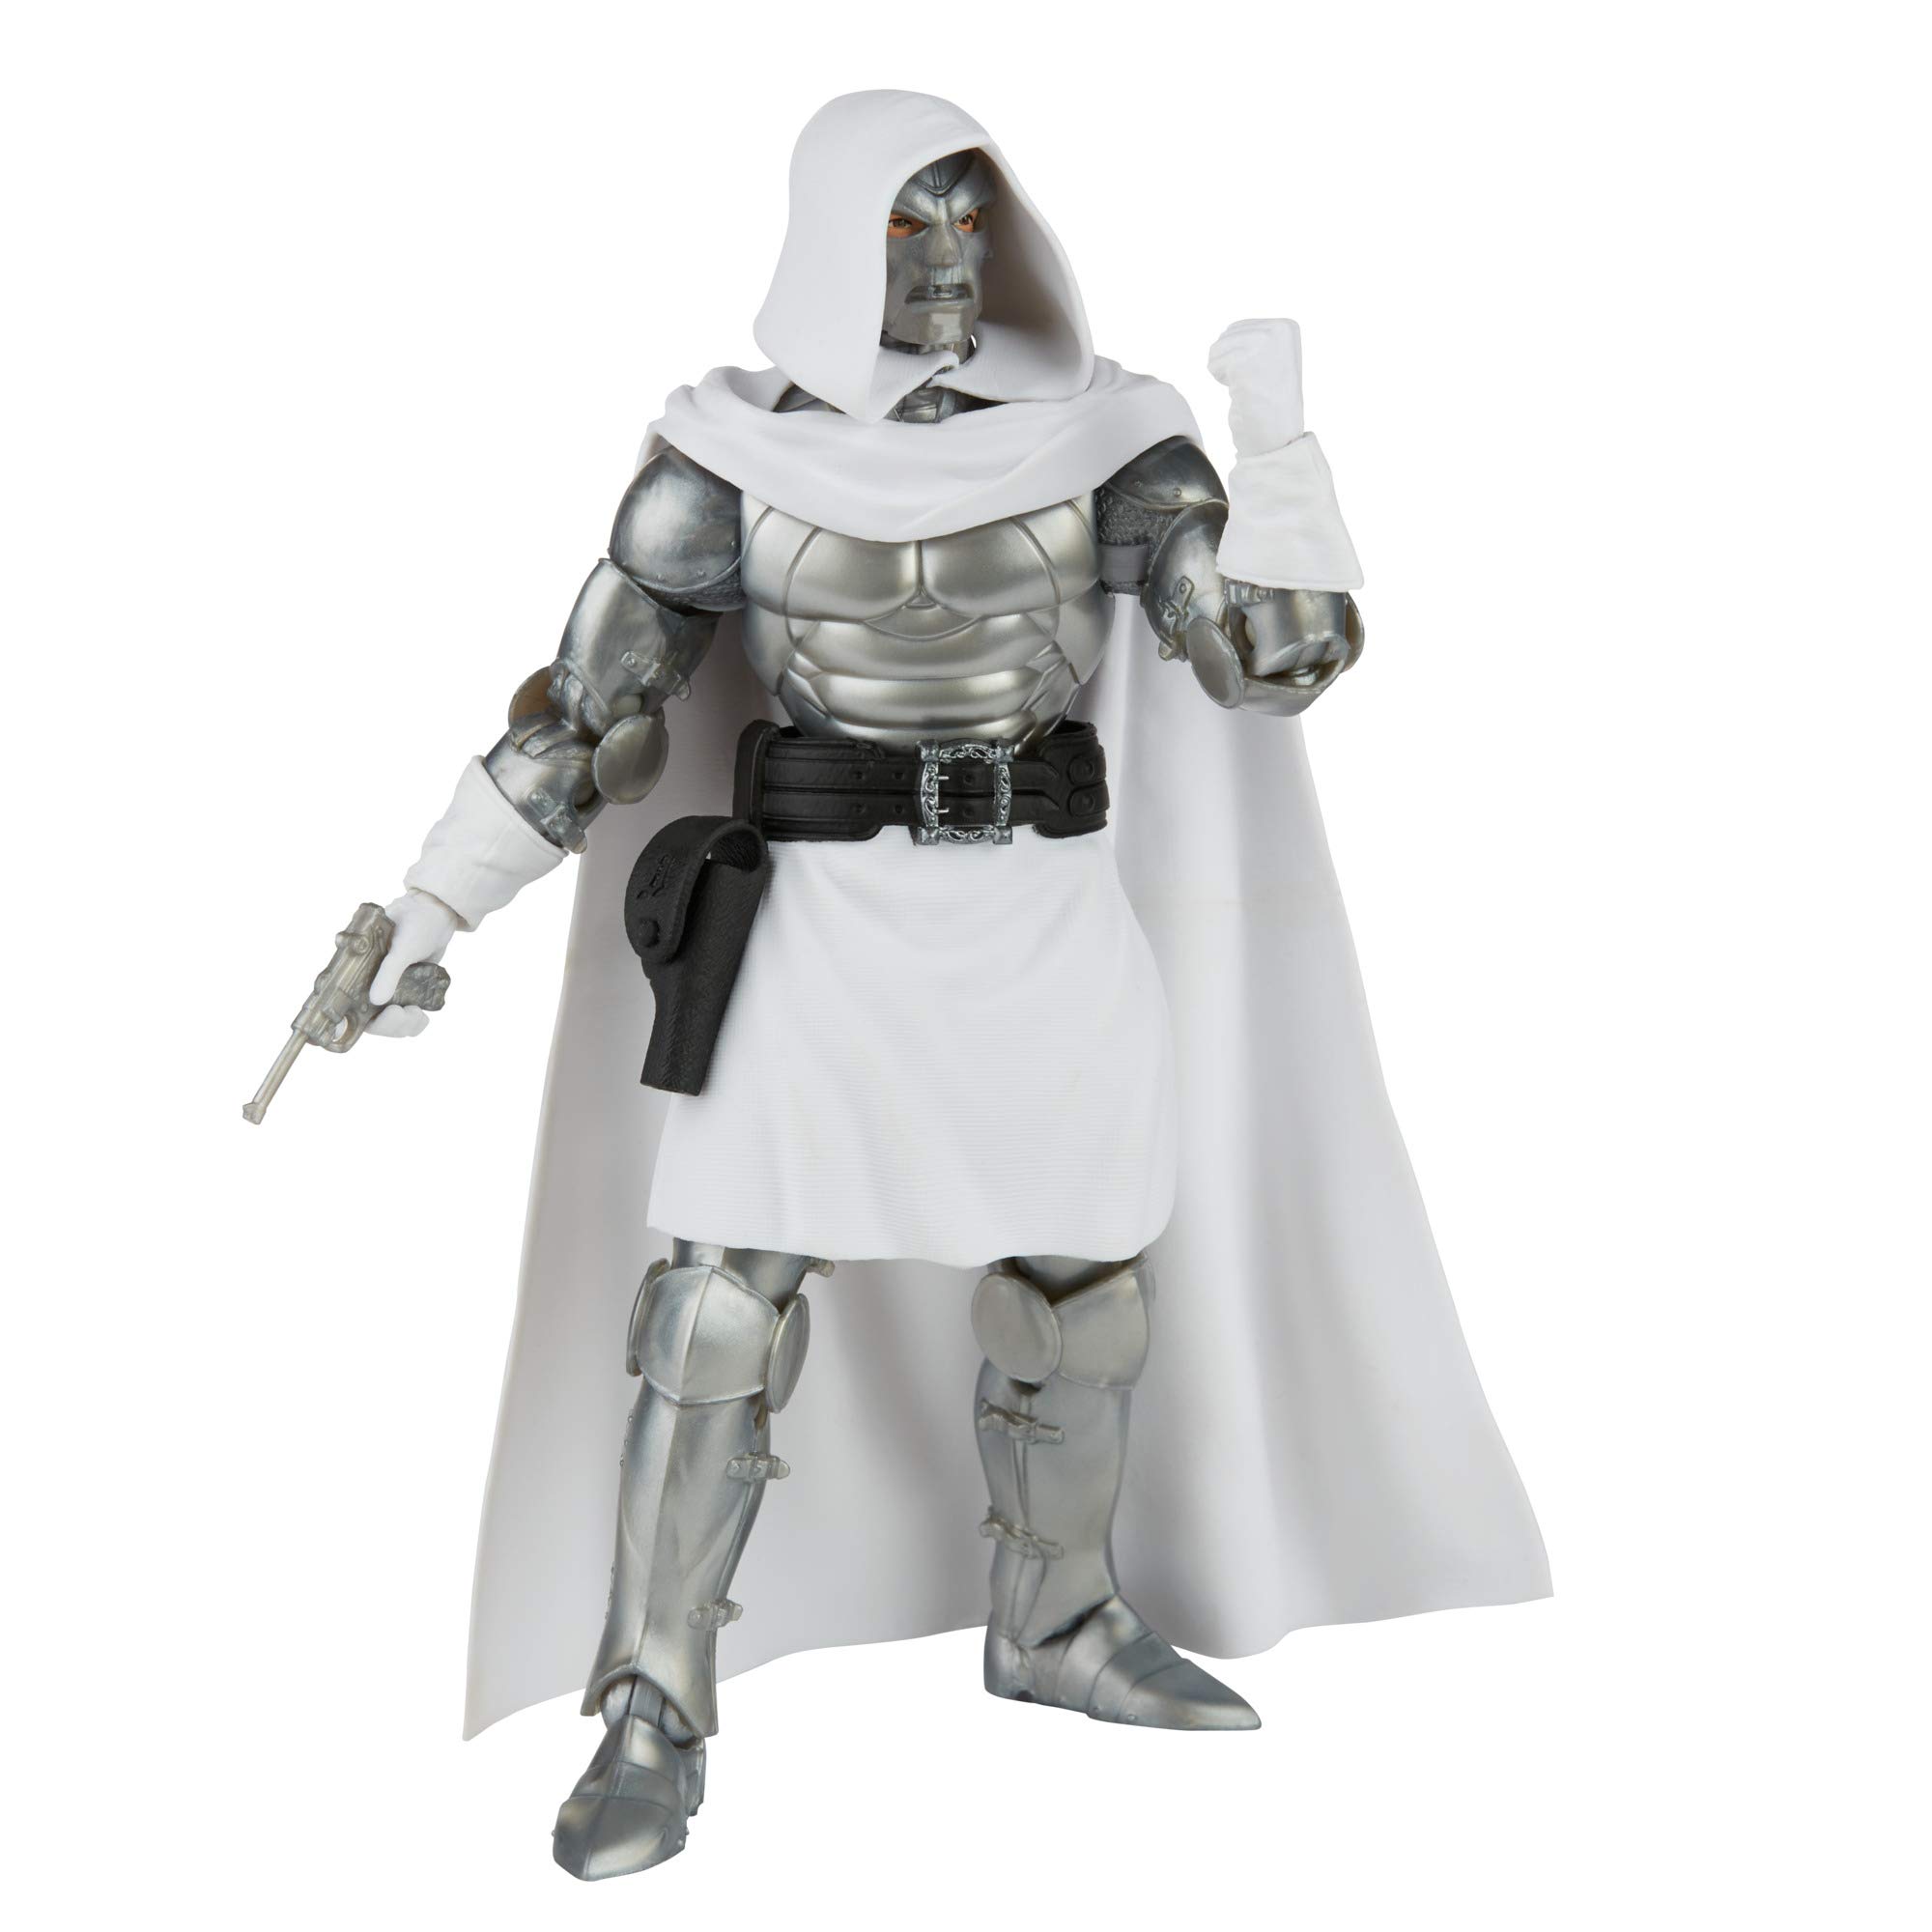 Marvel Hasbro Legends Series 6-inch Collectible Action Dr. Doom Figure and 4 Accessories